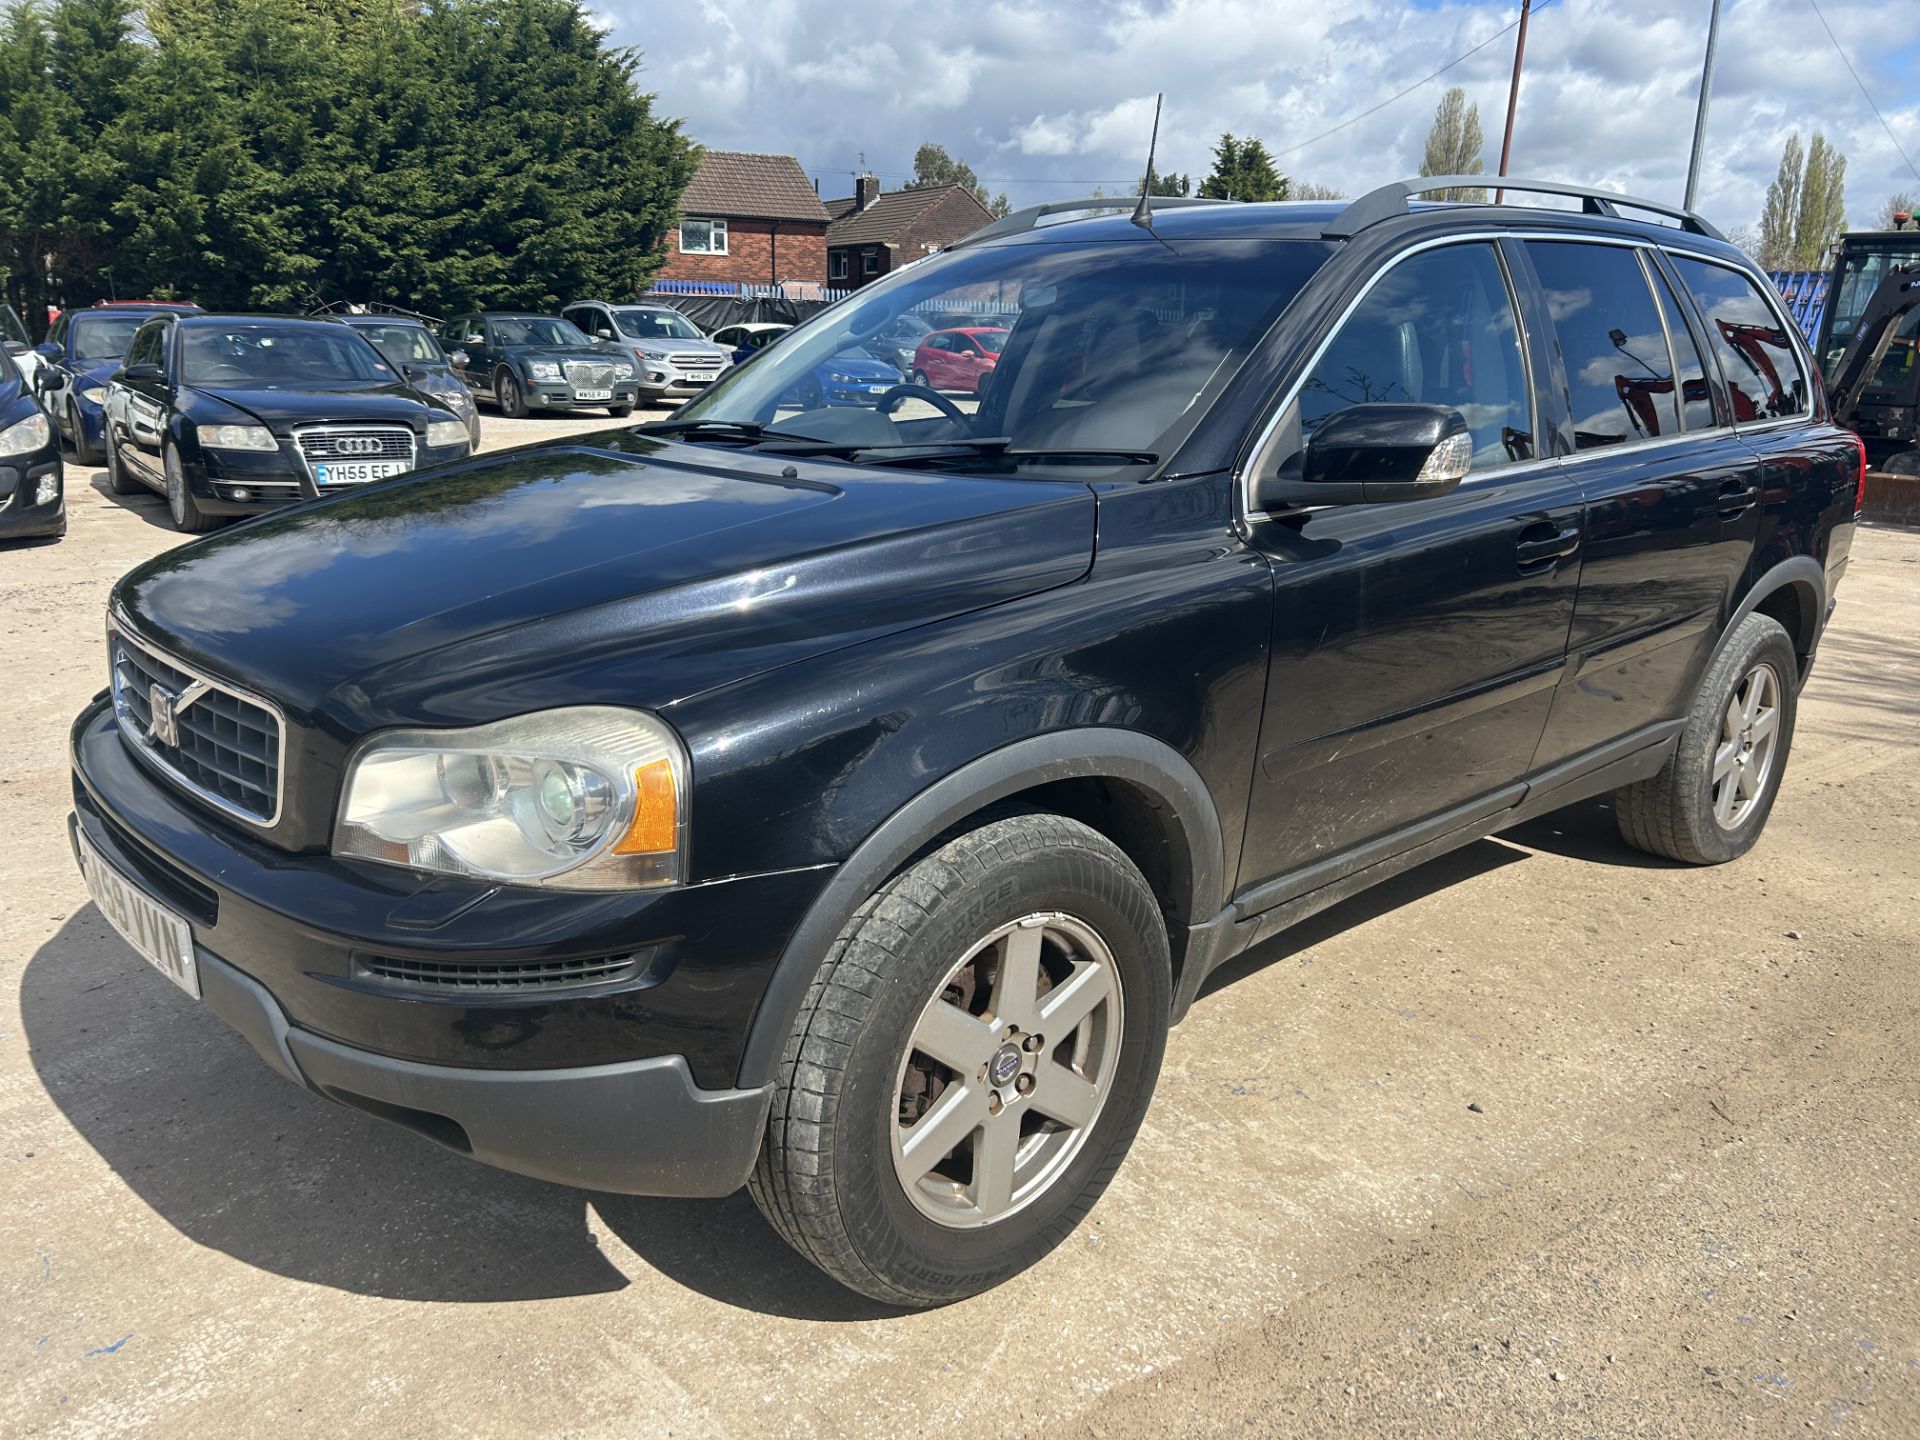 Volvo XC90 Active AWD D5 Auto Diesel Estate | SA59 VVN | 130,718 Miles - Image 3 of 13